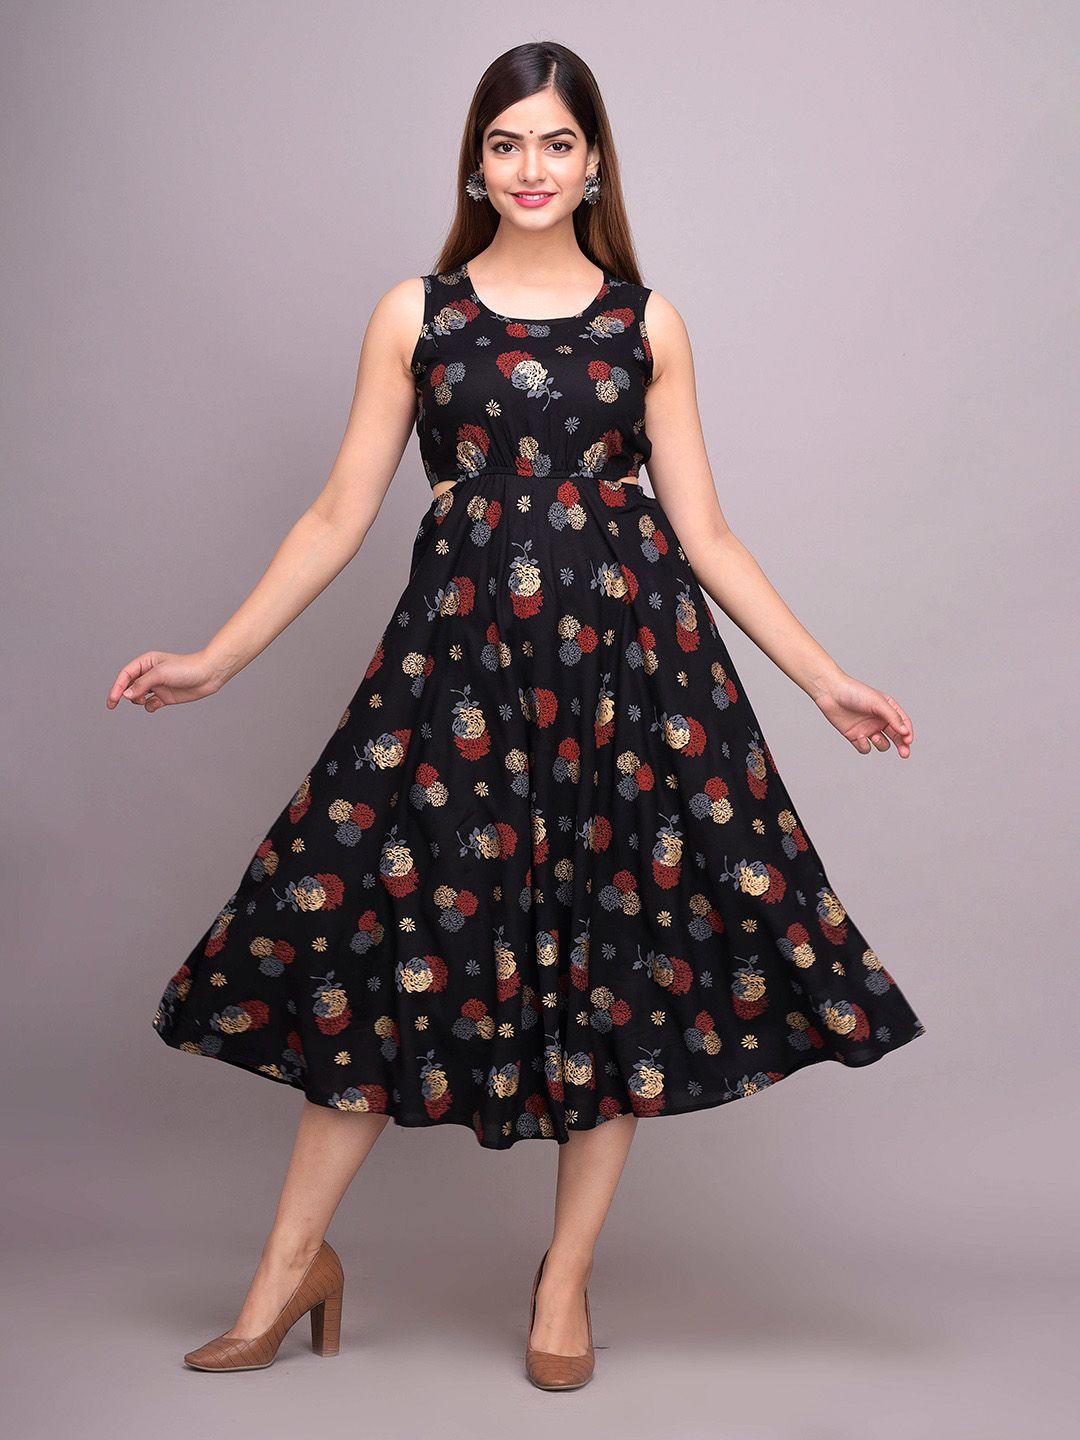 unibliss-black-&-french-middle-red-purple-floral-print-a-line-midi-dress